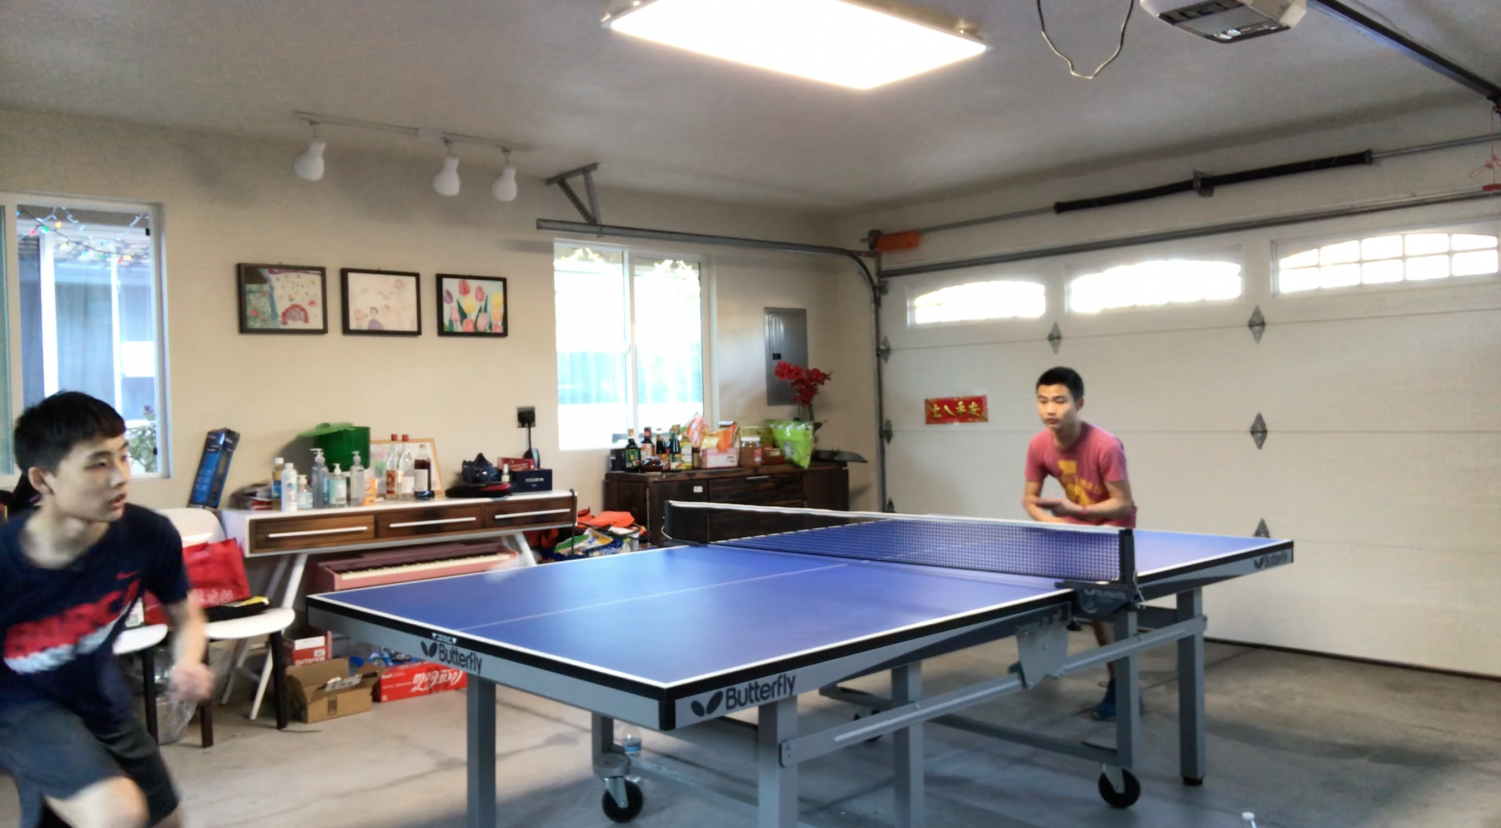 Creation of Ping Pong club: Ideas and progress – The Epitaph